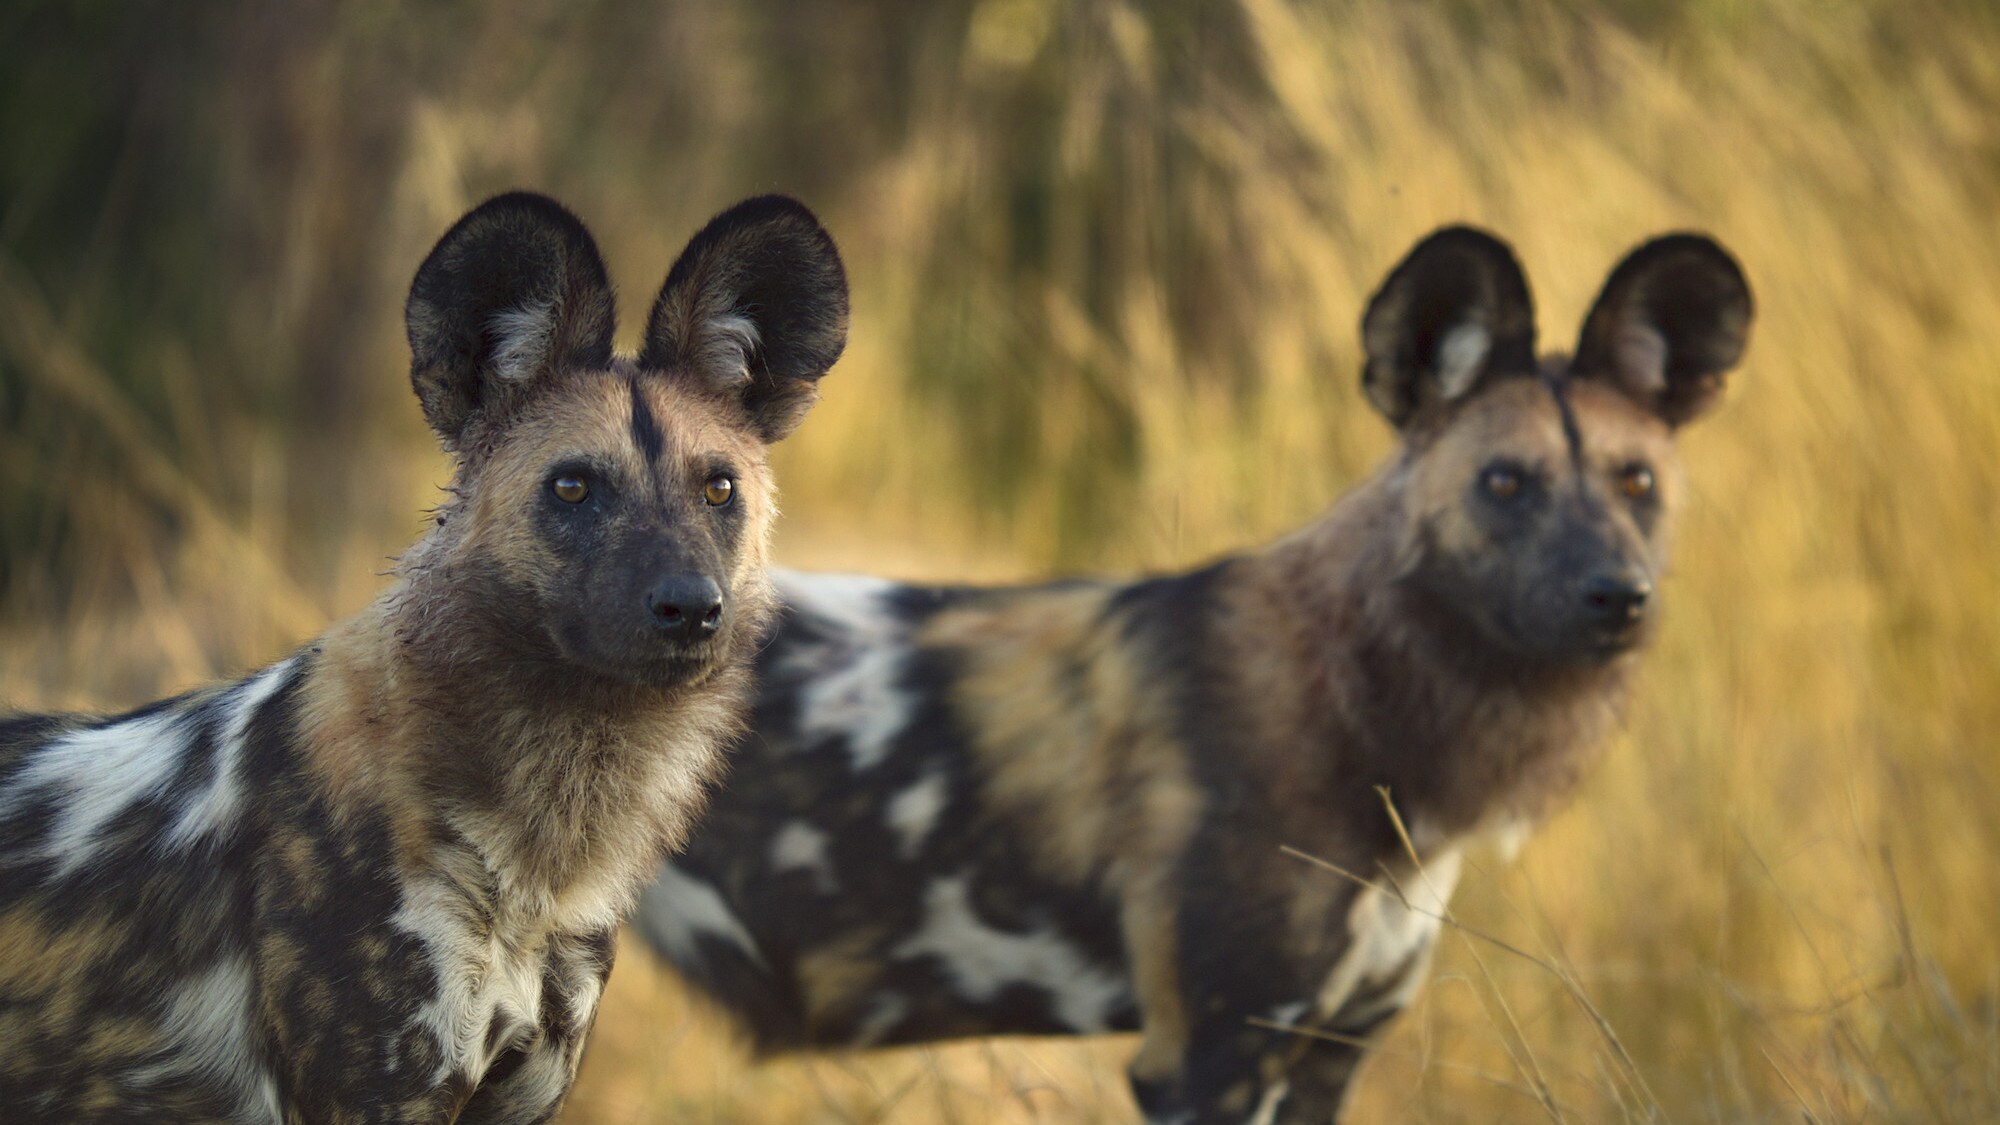 A pair of wild dogs. (National Geographic for Disney+/Bertie Gregory)